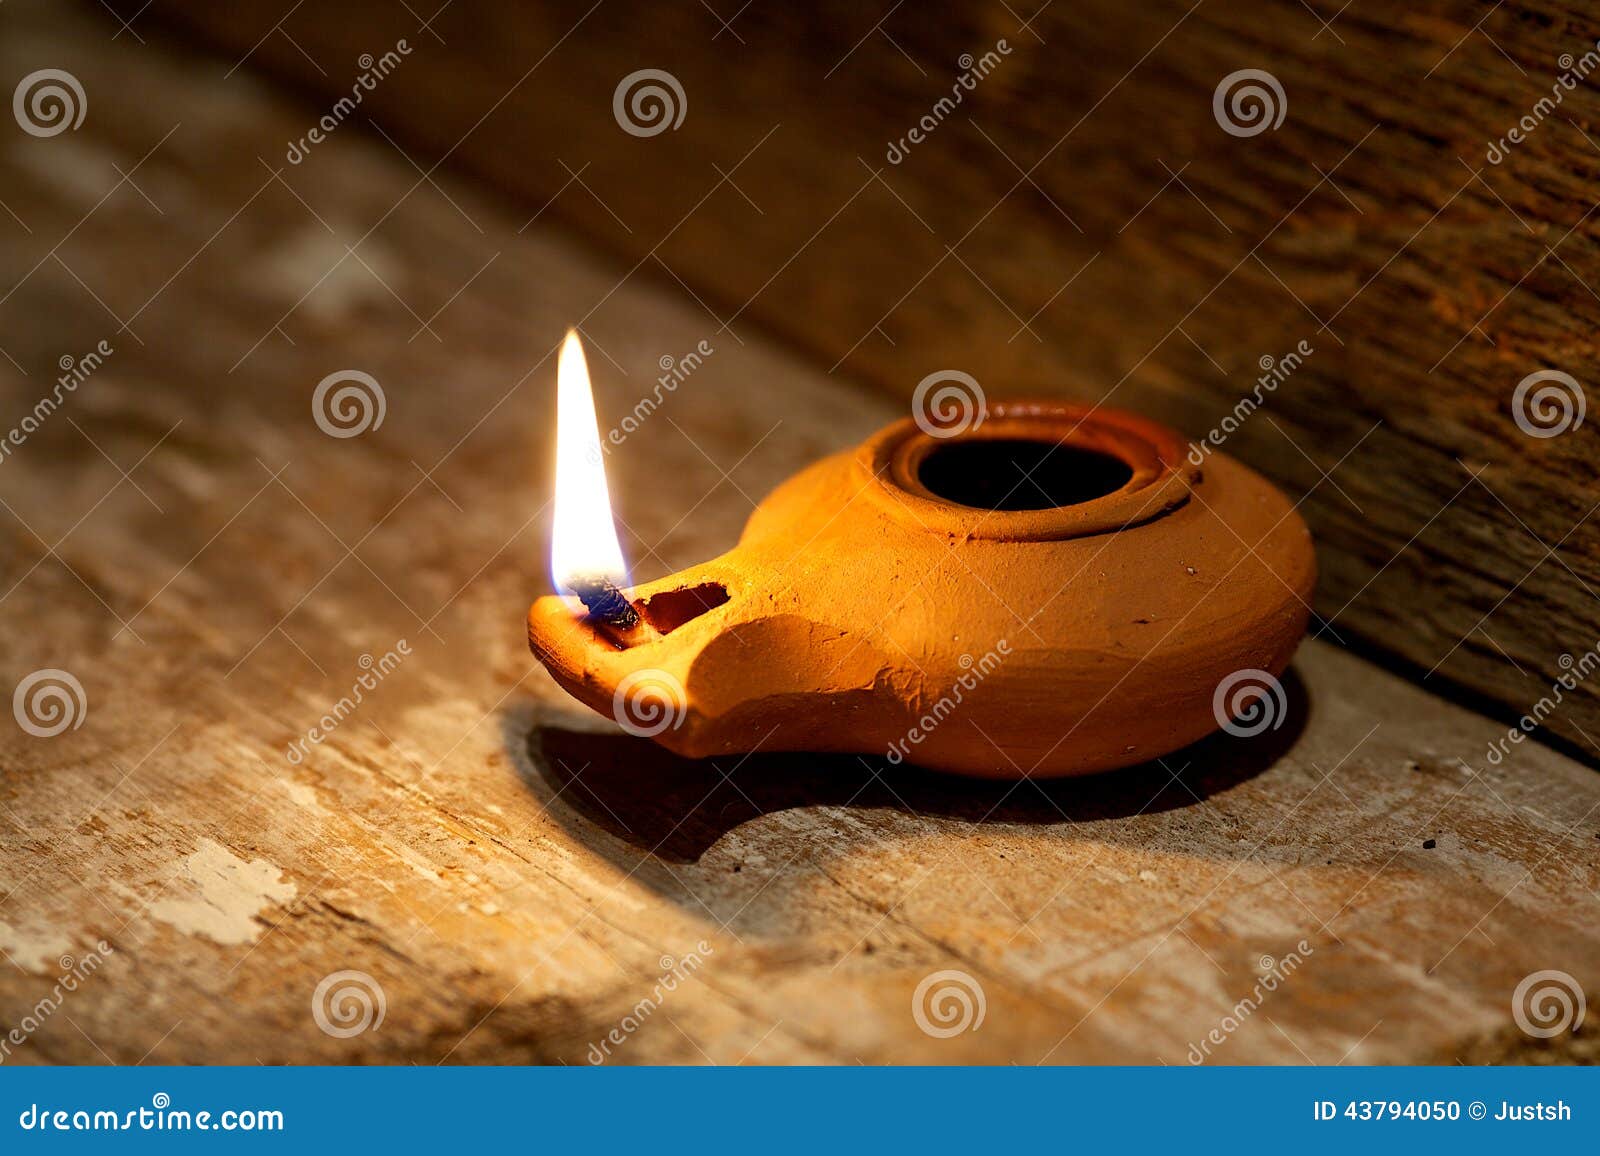 ancient middle eastern oil lamp made in clay on wood table